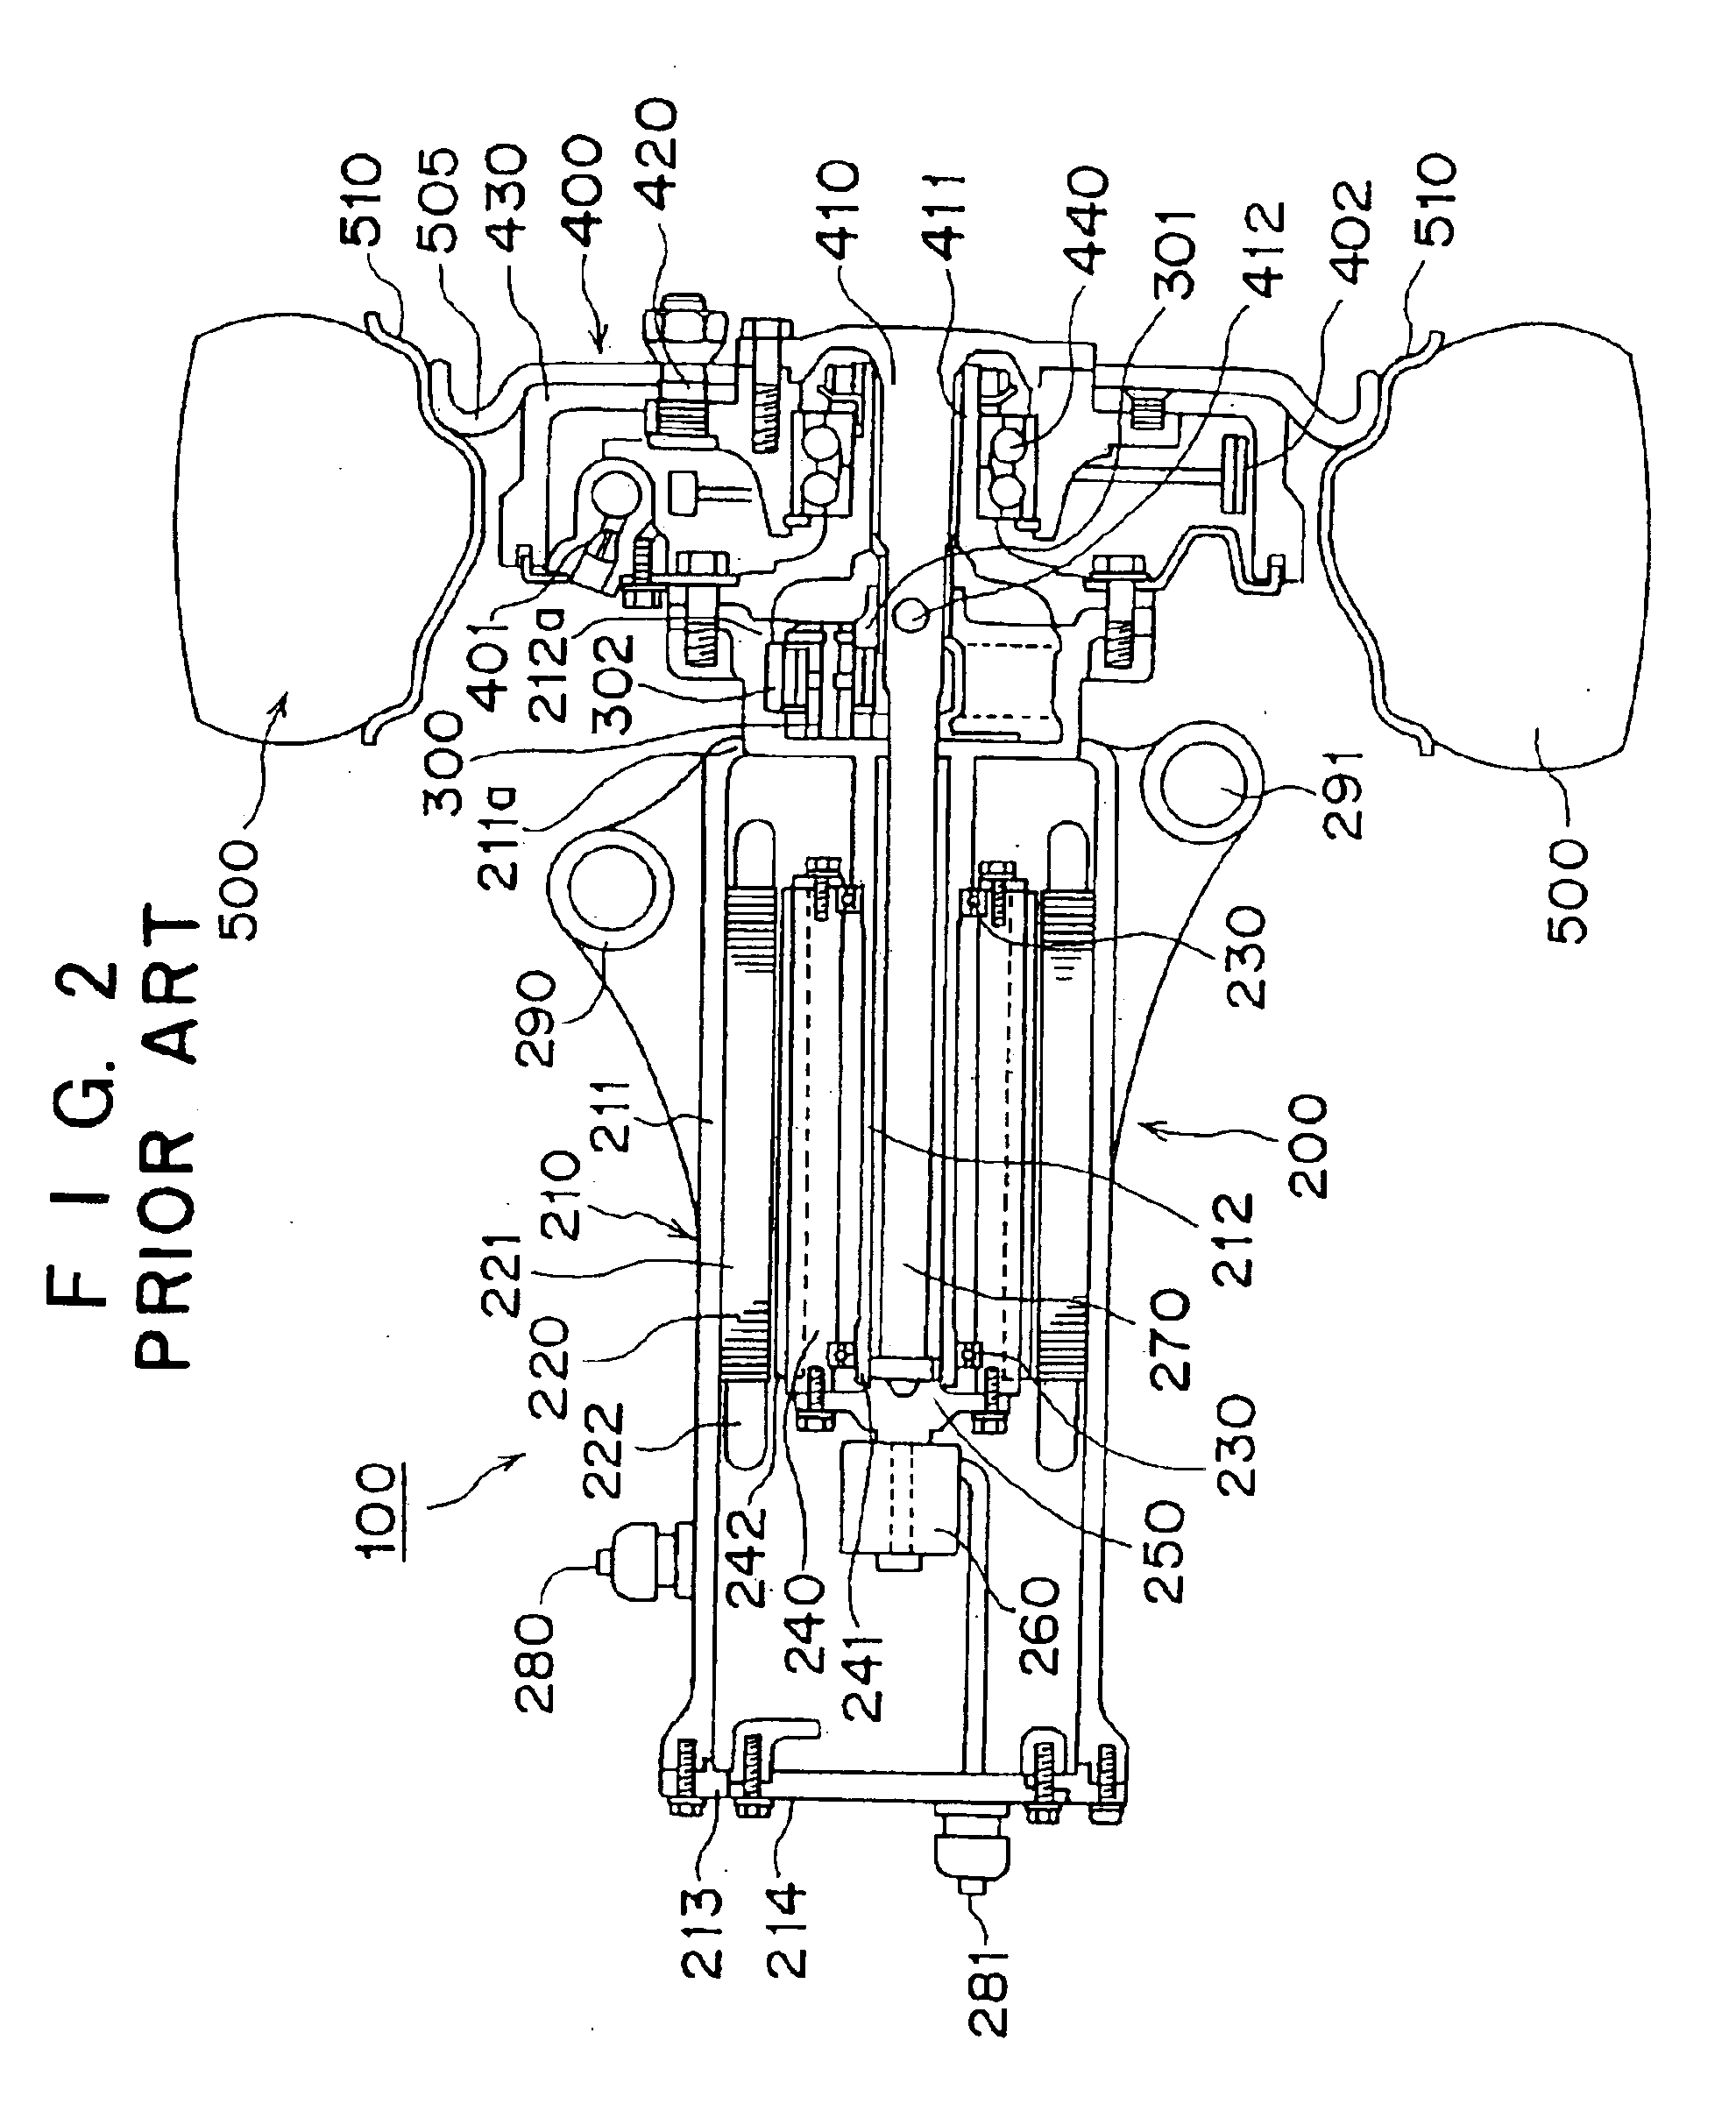 In-wheel motor for electric automobiles